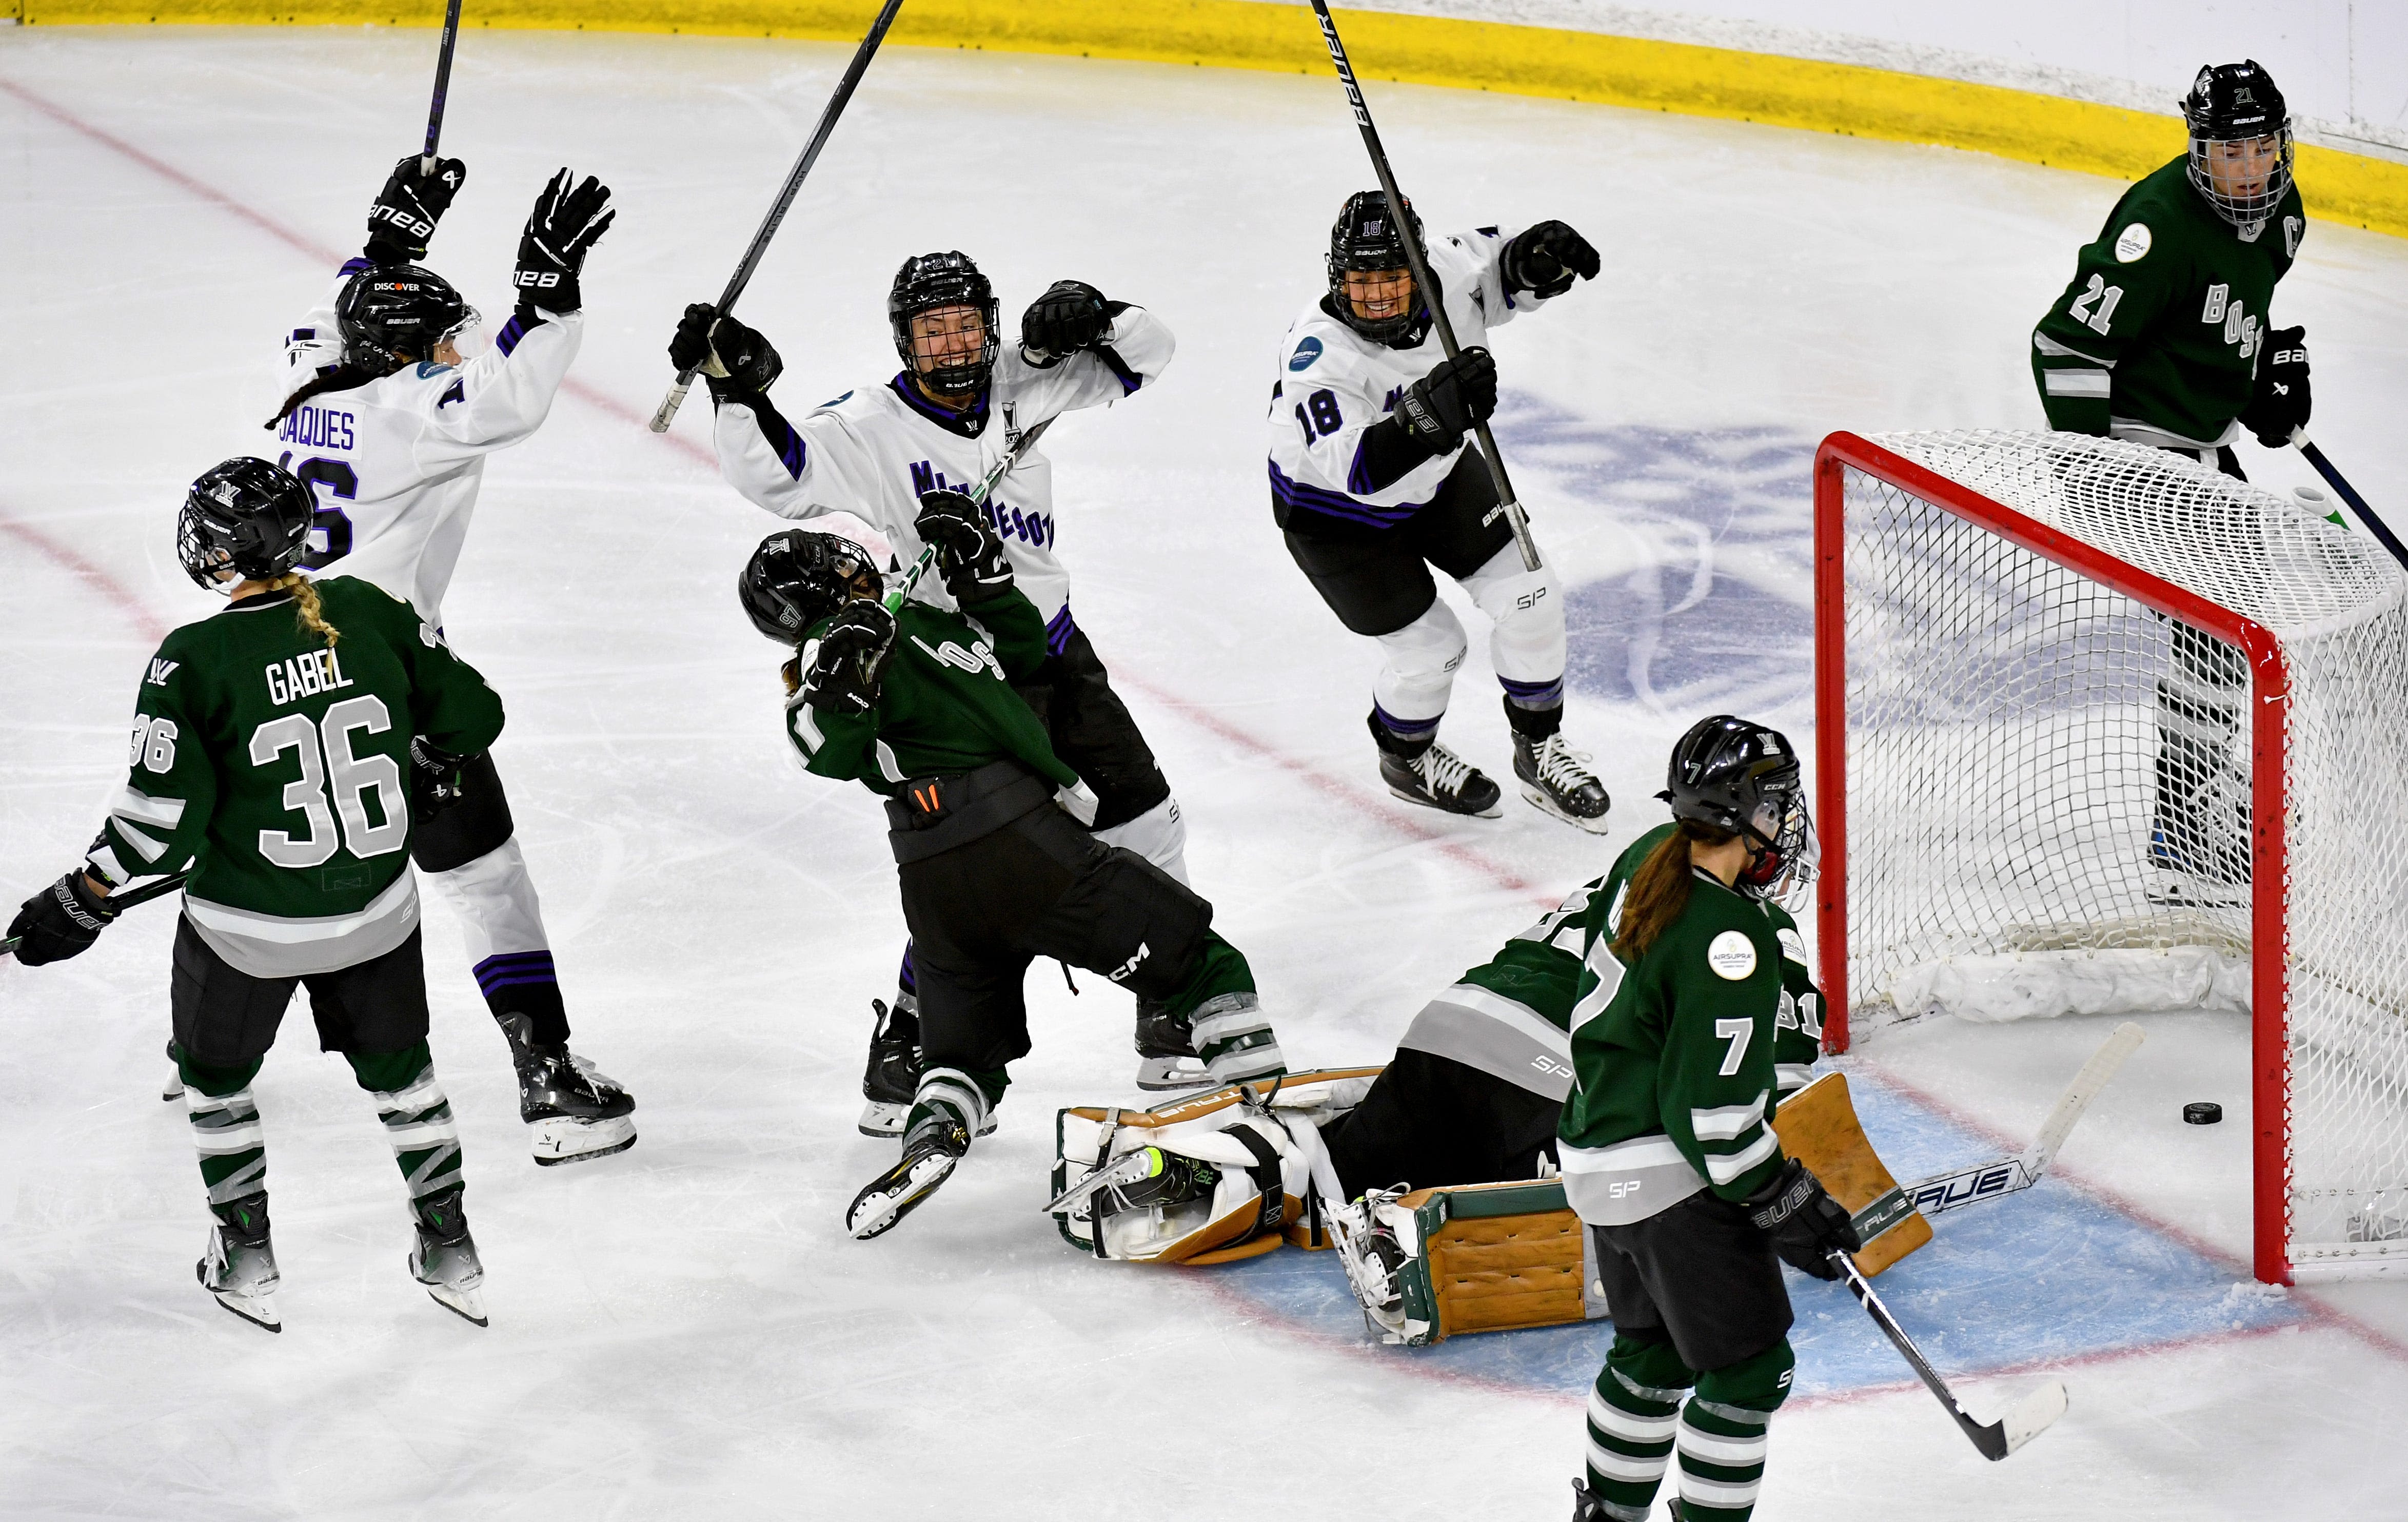 Minnesota defeats Boston in Game 5 to capture inaugural Walter Cup, PWHL championship